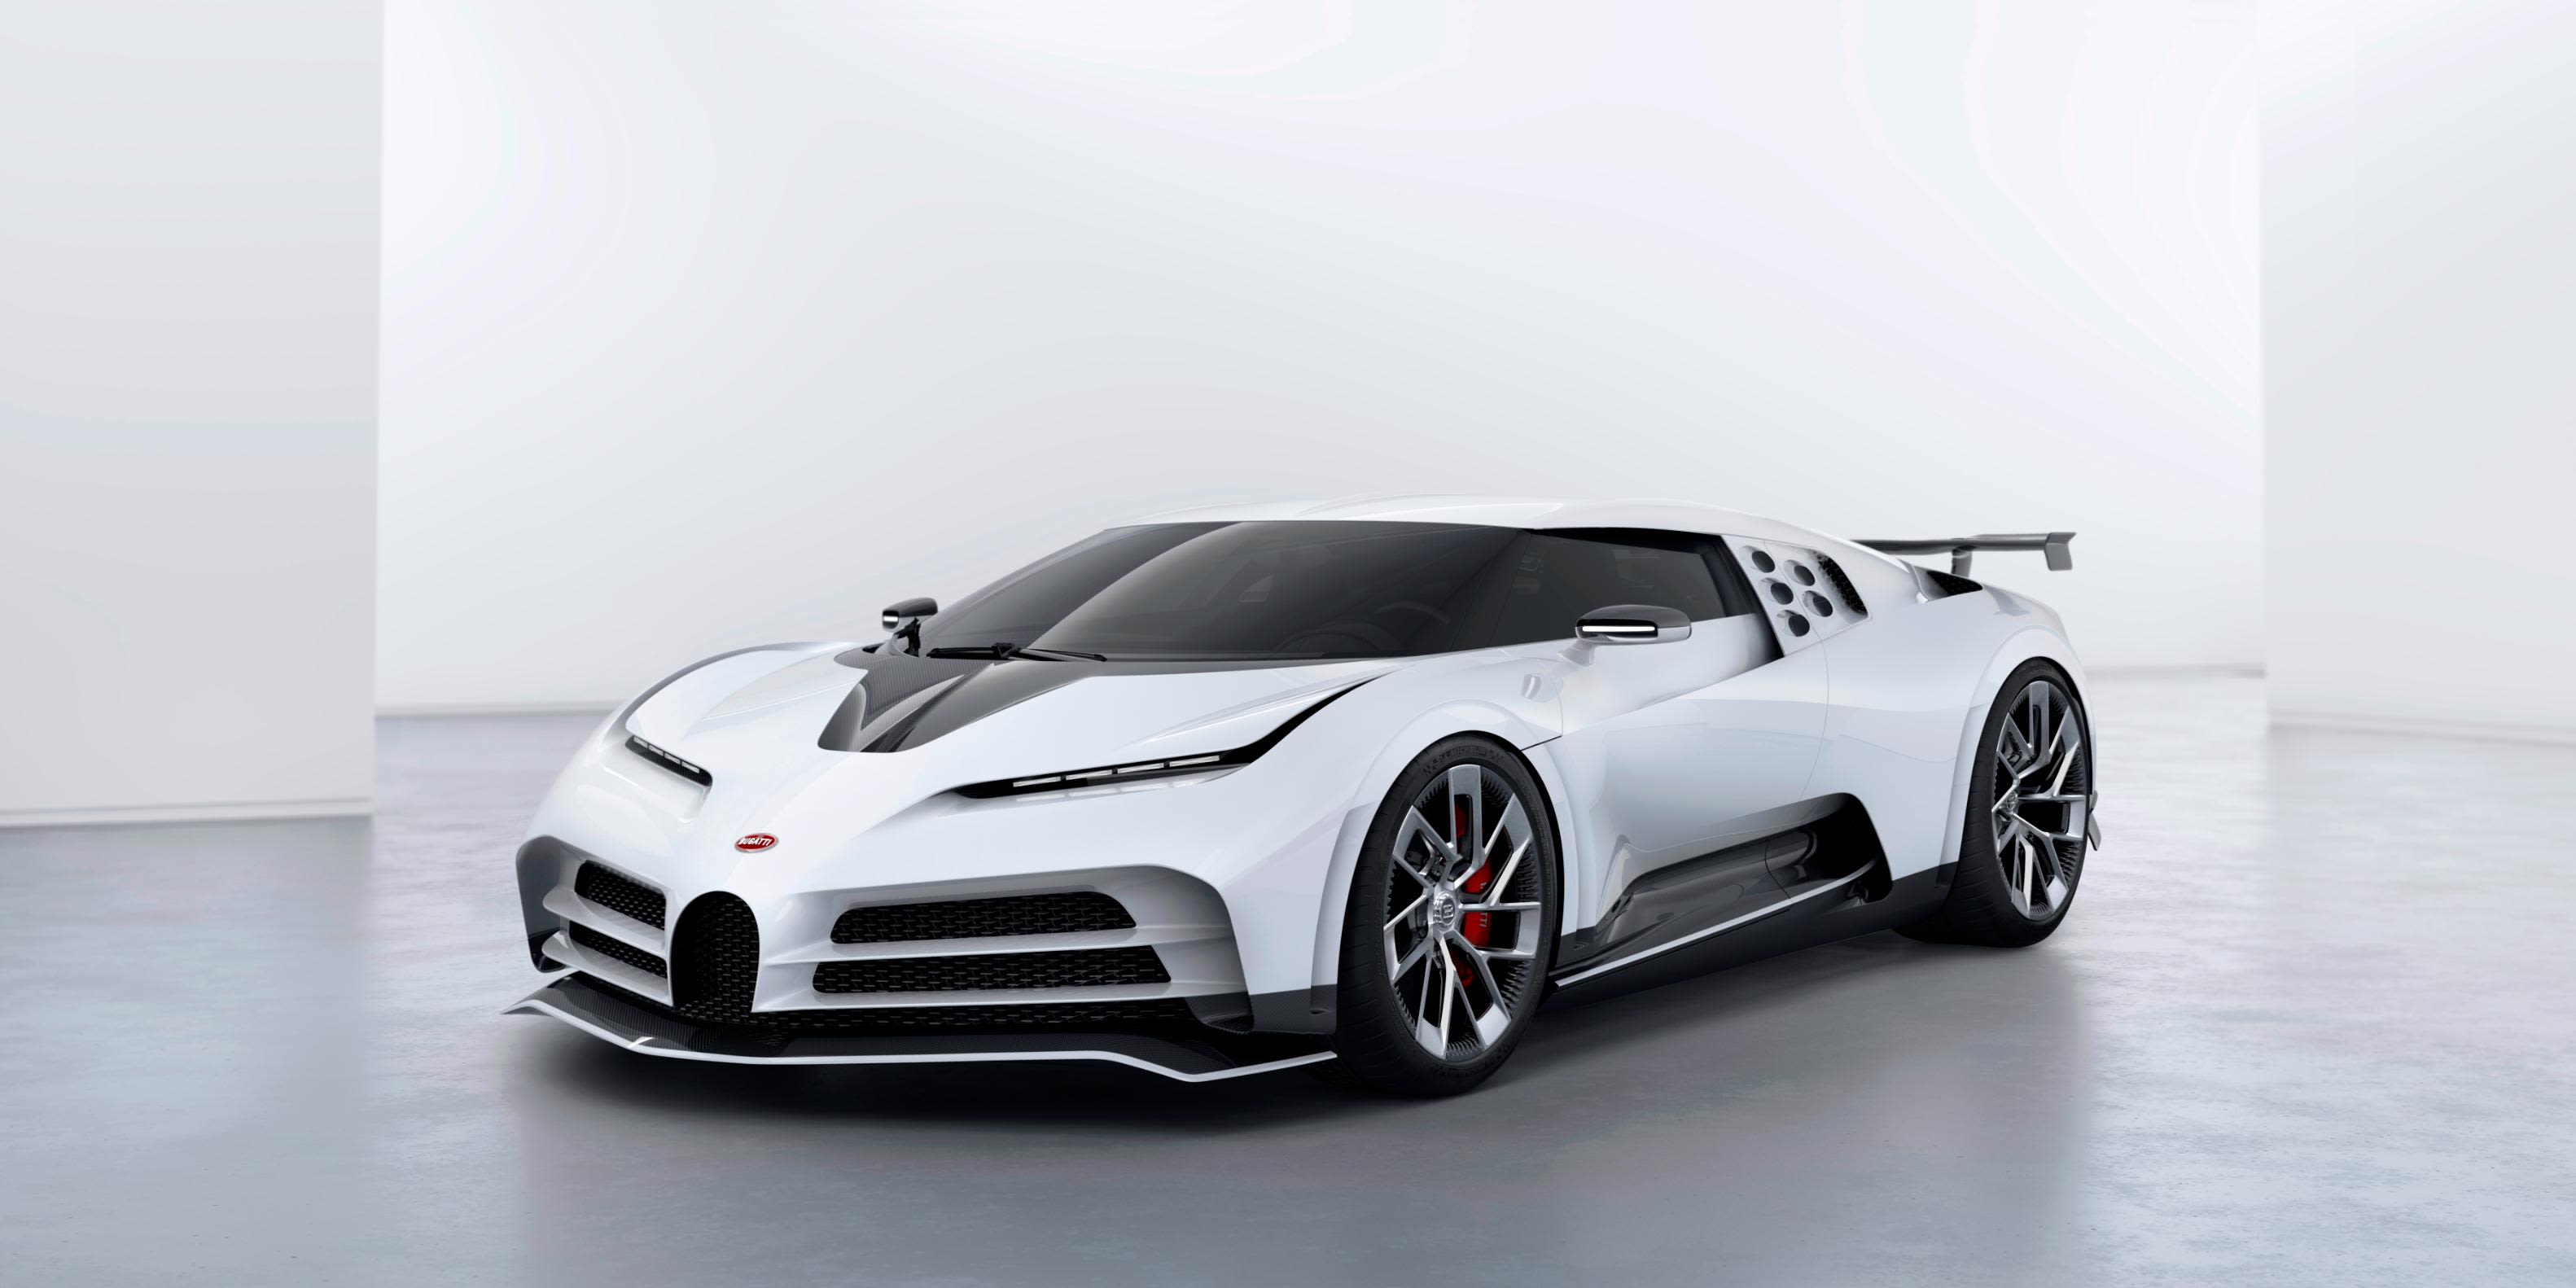 Only one Bugatti La Voiture Noire exists and its owner is a mystery